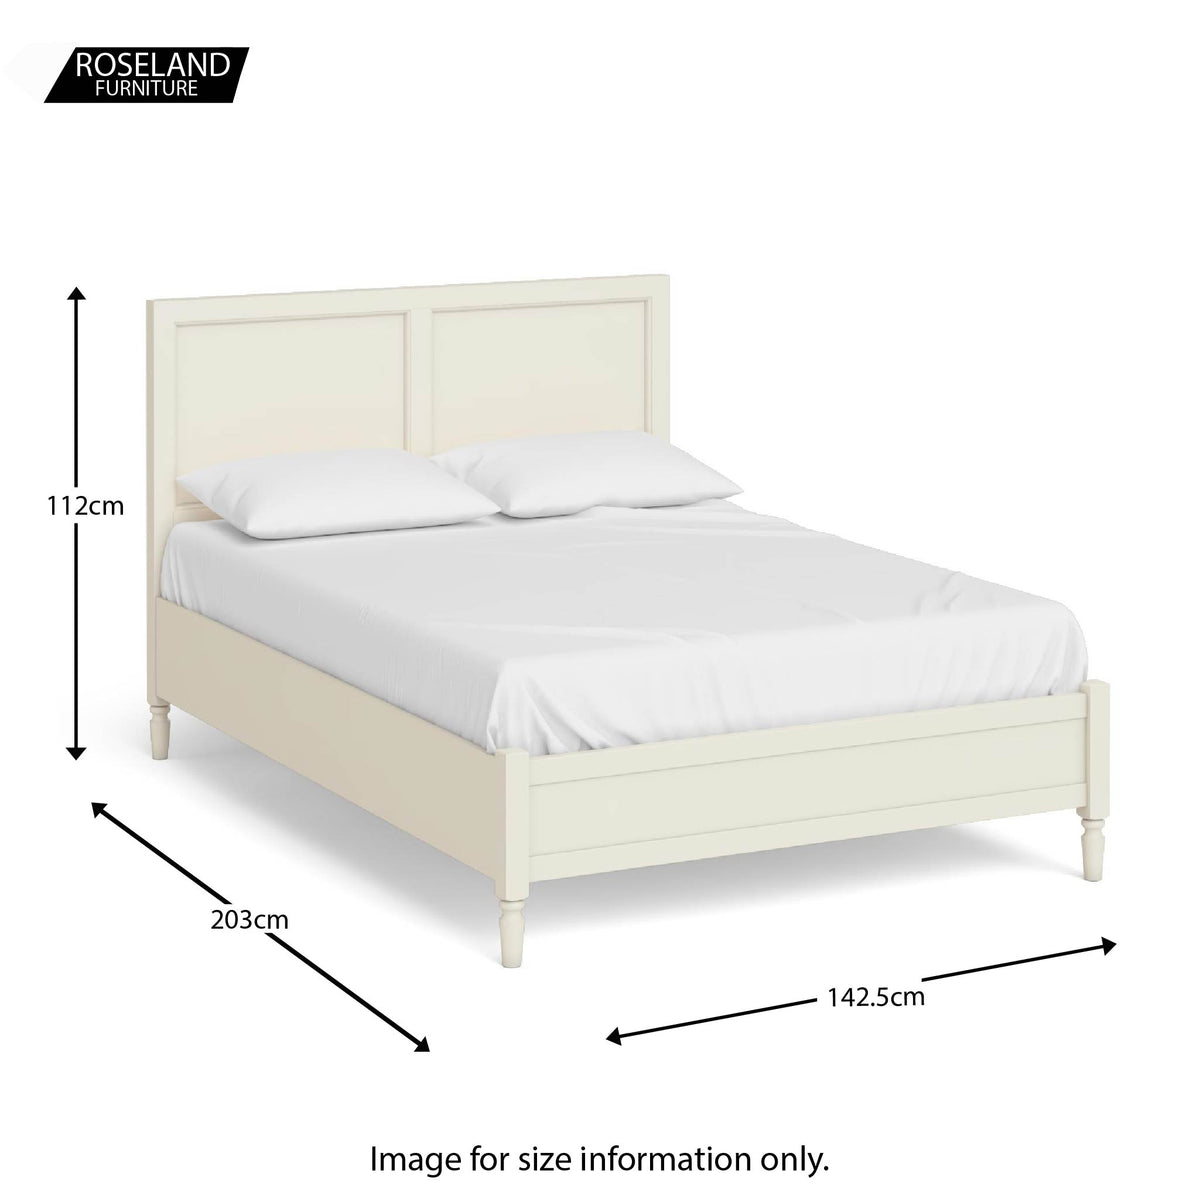 Dimensions for The Muslanne Cream 4'6" Double Bed Frame from Roseland Furniture